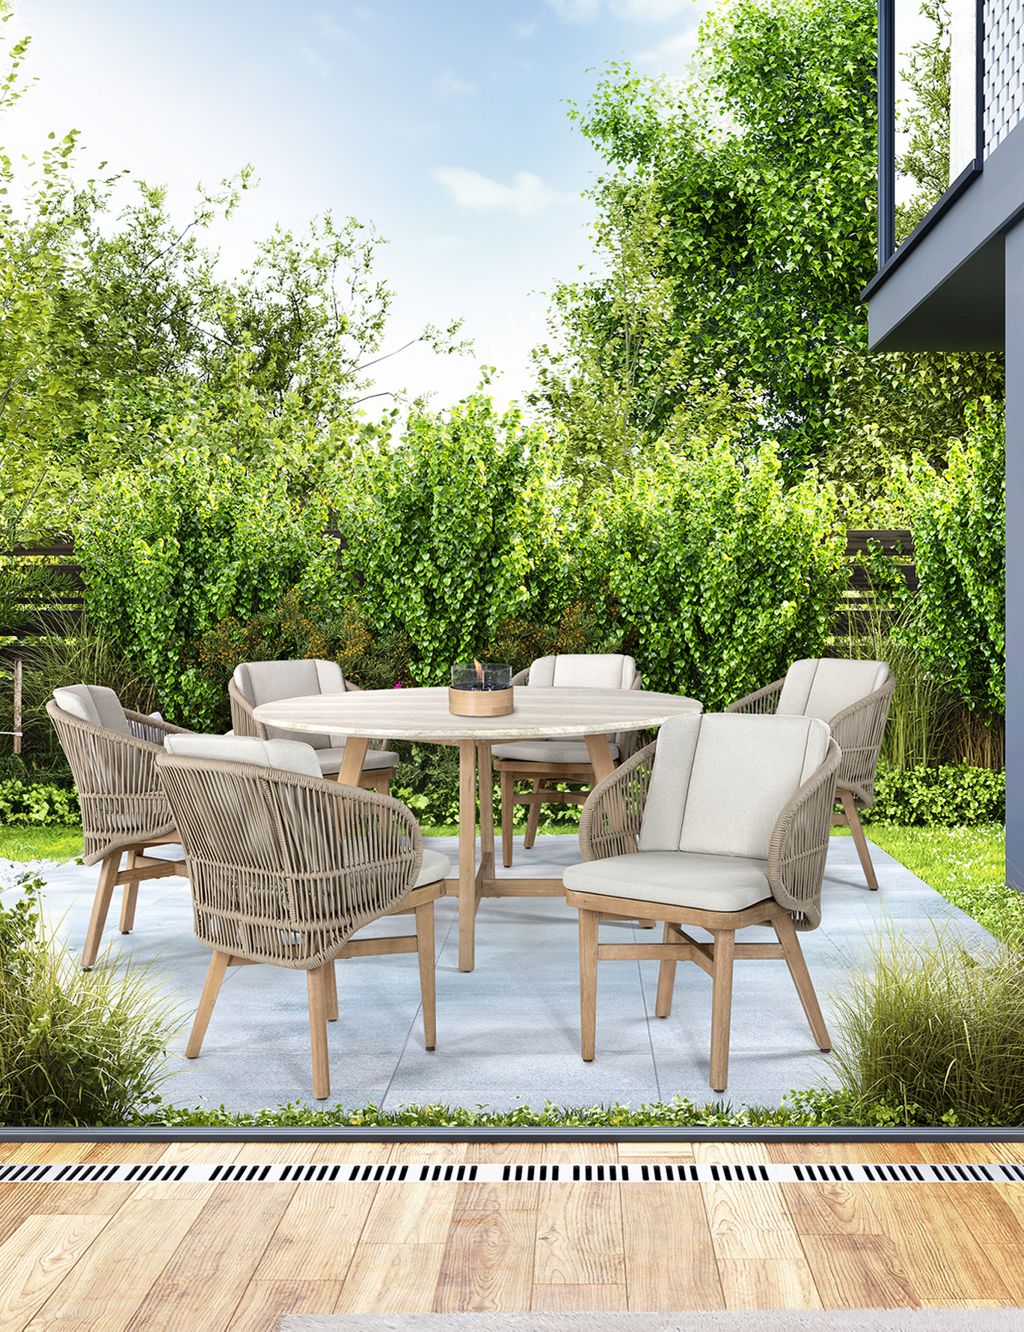 Bali Garden Dining Table & Chairs